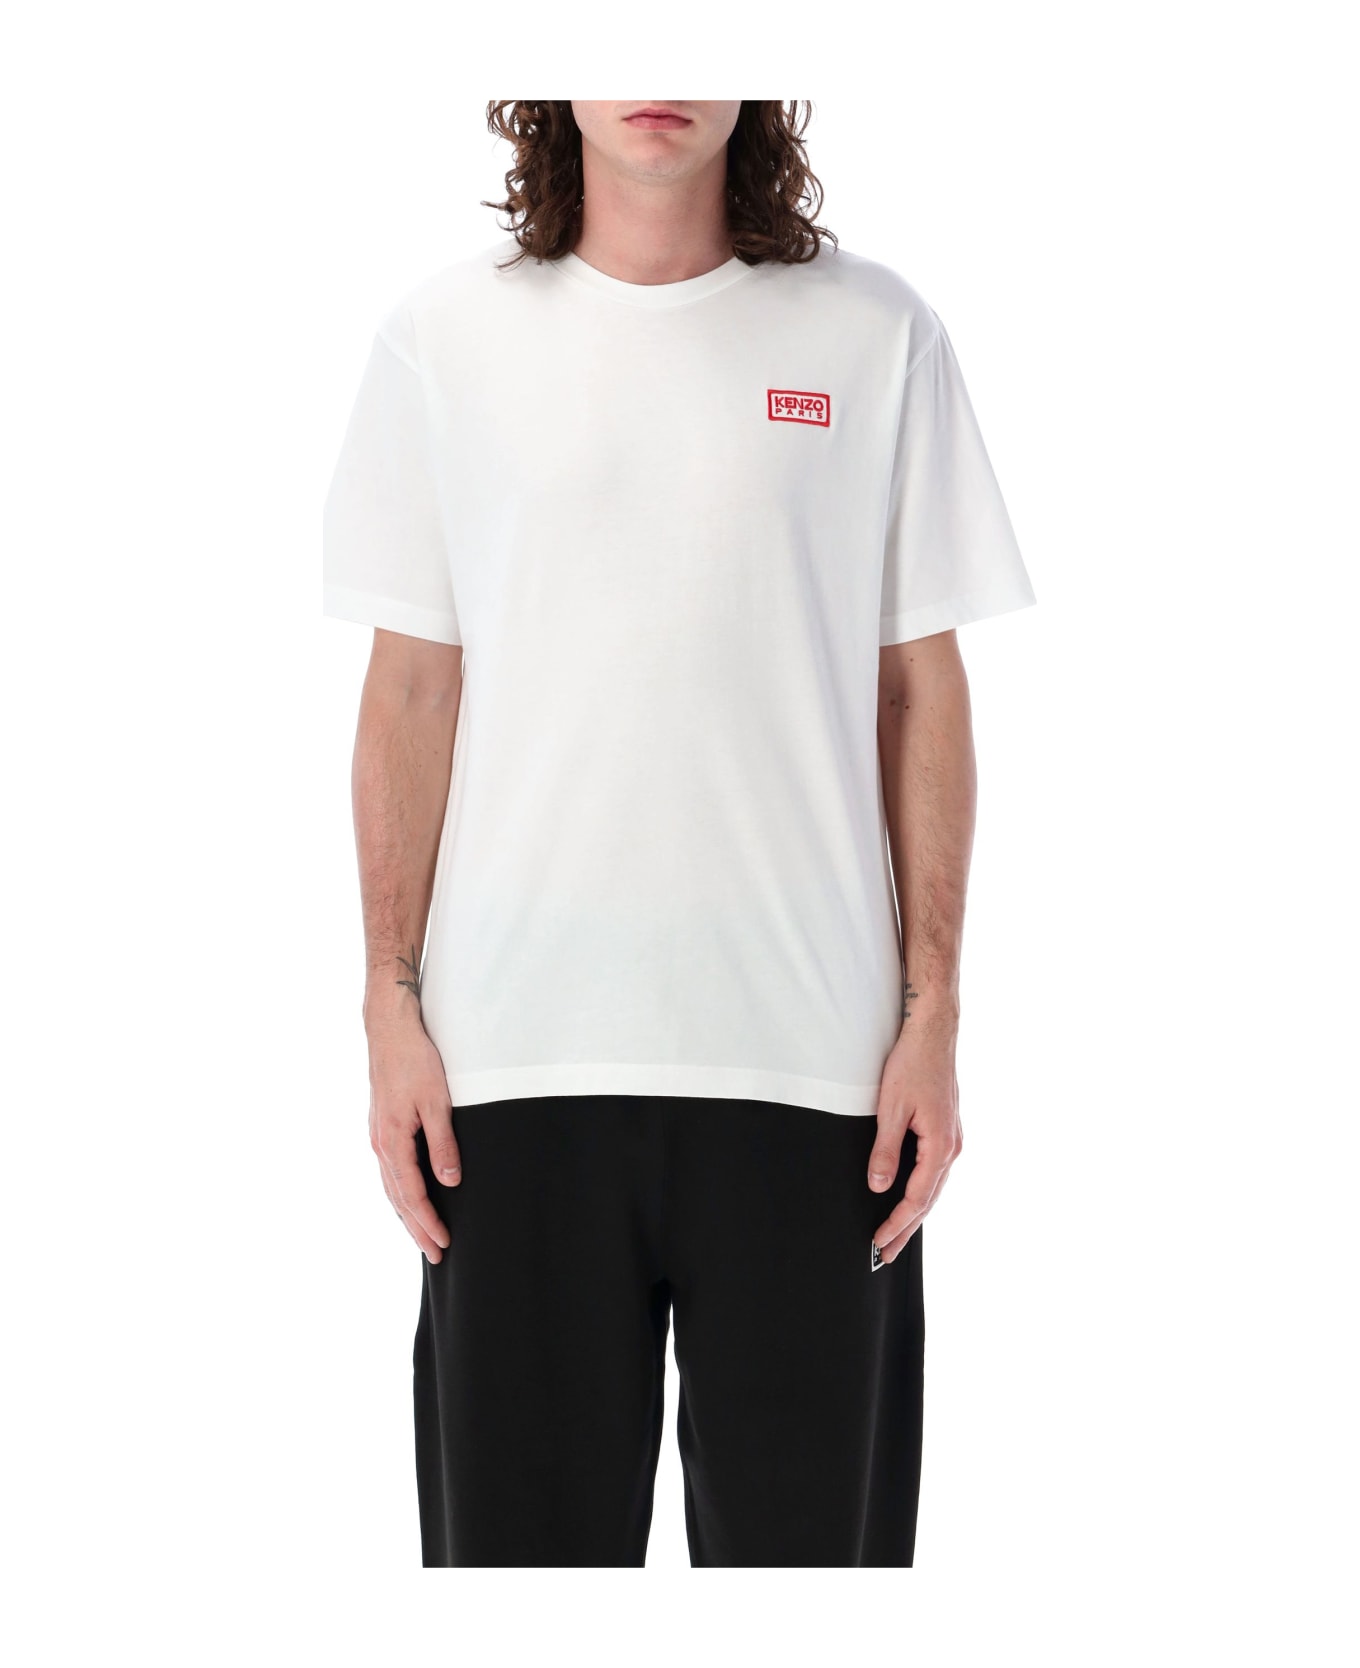 Kenzo Bicolor Kp Classic T-shirt - OFF WHITE